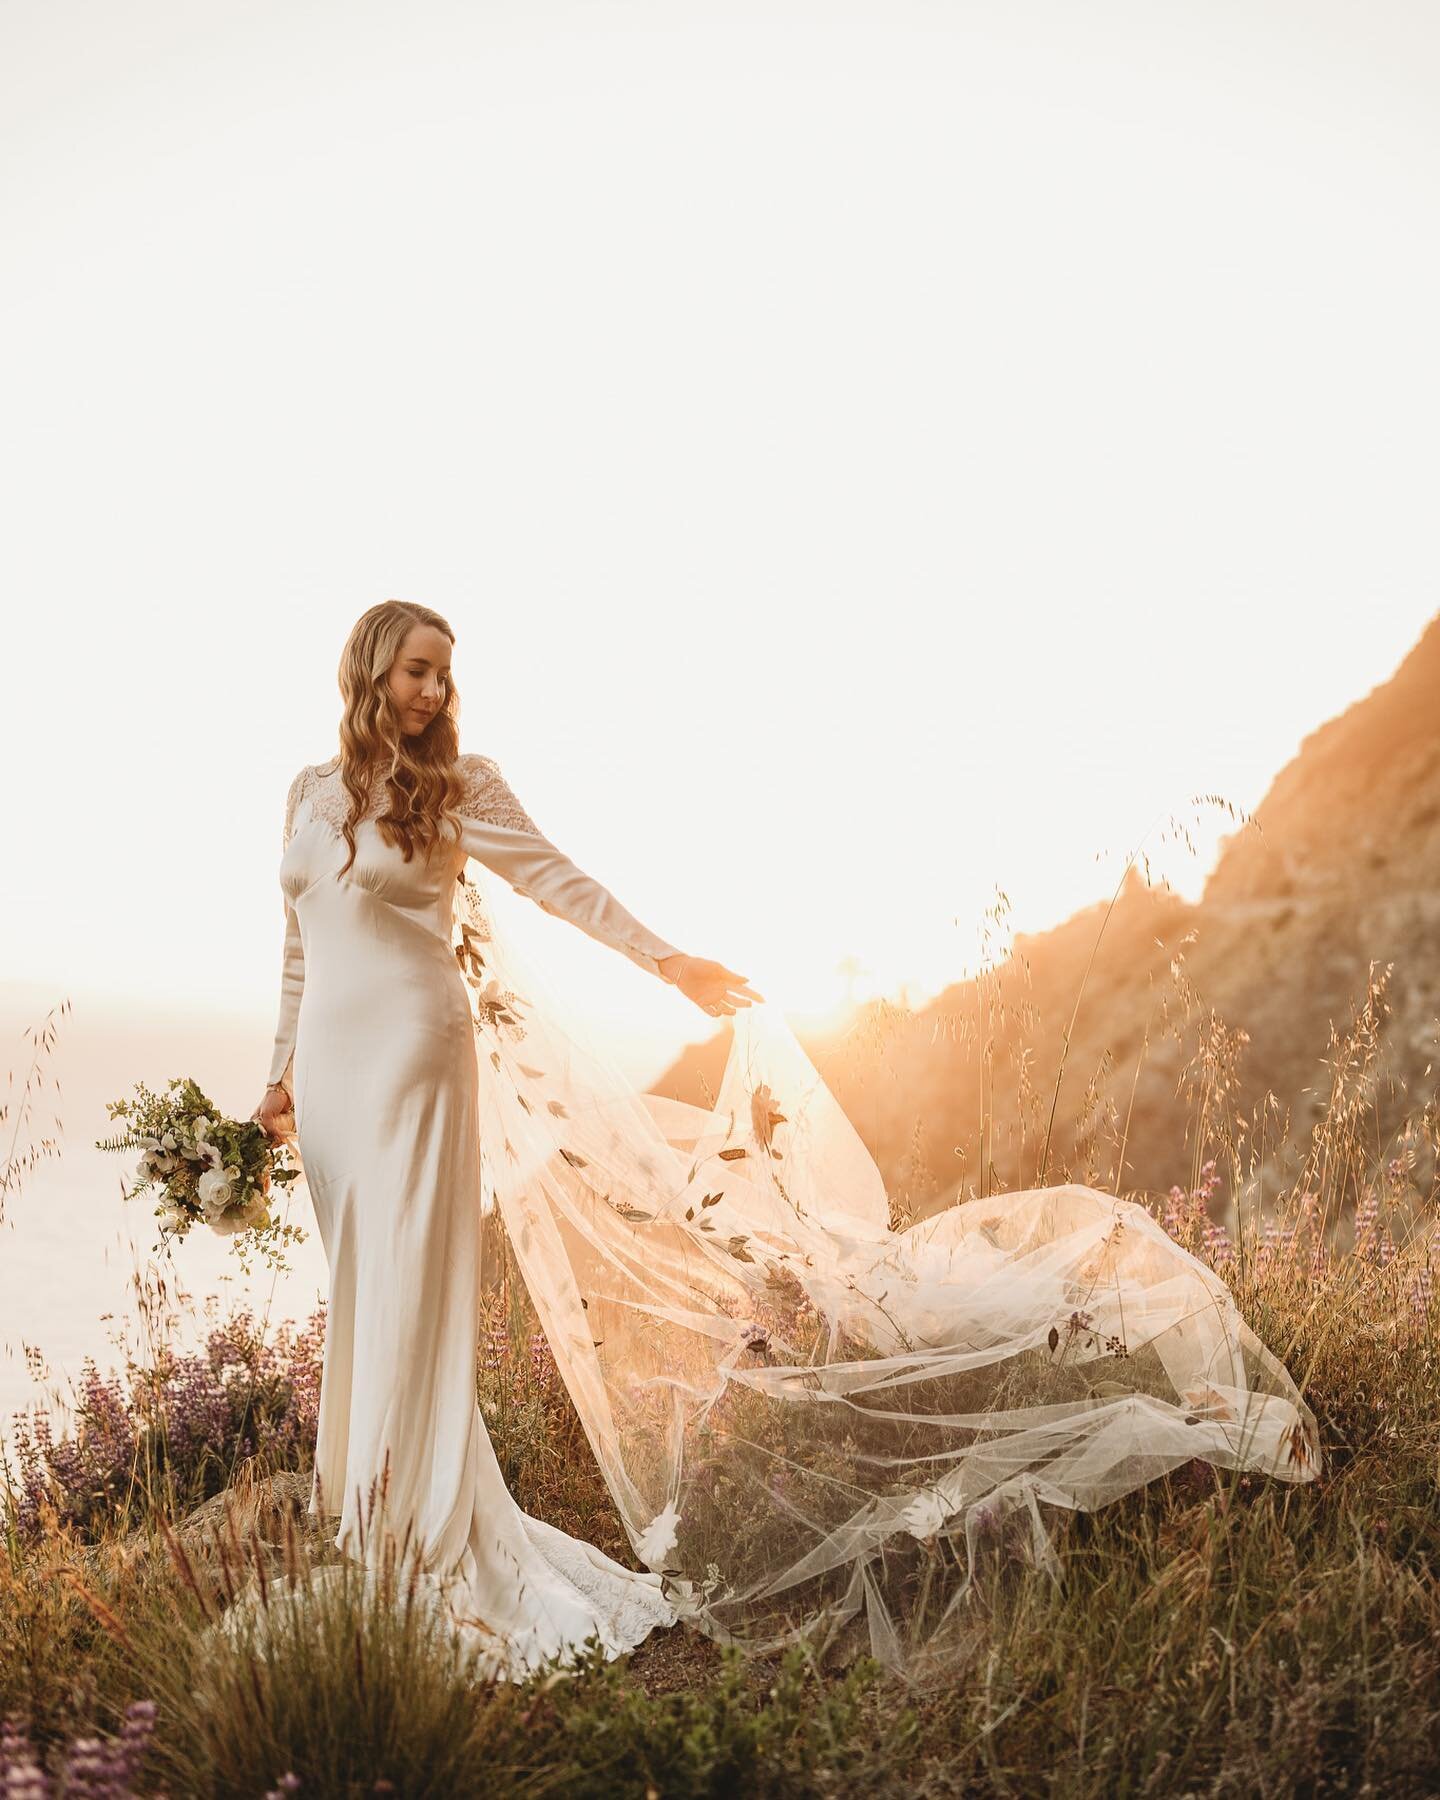 Big Sur is a spiritual experience. It&rsquo;s truly an unreal place. So fitting that R + P decided to use this as the backdrop to their lovely vow exchange. So incredibly blessed to witness and document their love. 🙏🏼 
.
#bigsurwedding #bigsurweddi